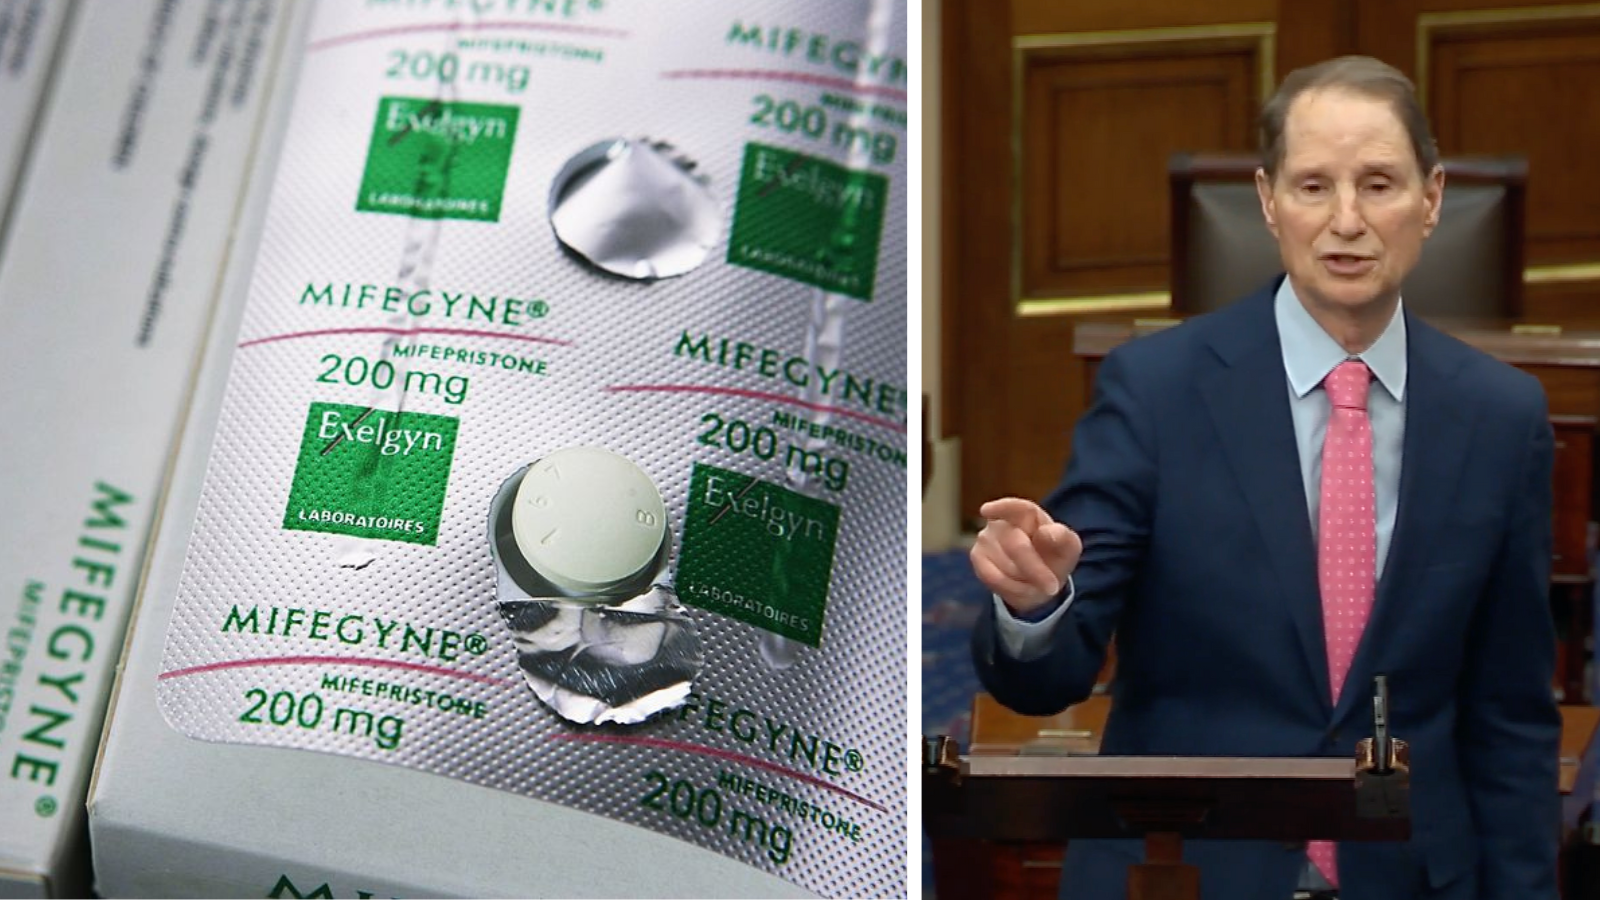 Lawmaker Urges Biden to ‘Ignore’ Texas Judge Who May Order FDA to Ban Mifepristone and Abortion Pill by Mail